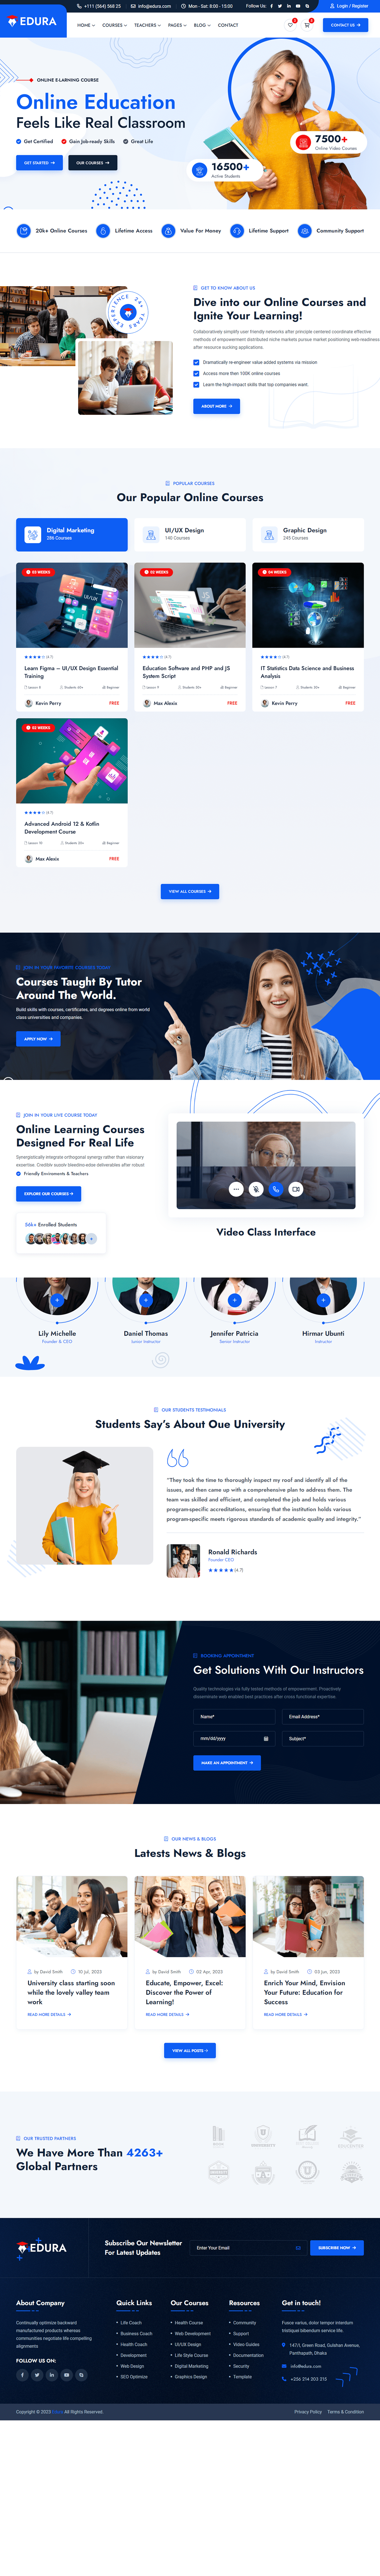 academy e learning Education Instructor learning management online learning teacher and instructor teaching freelancer courses online courses class